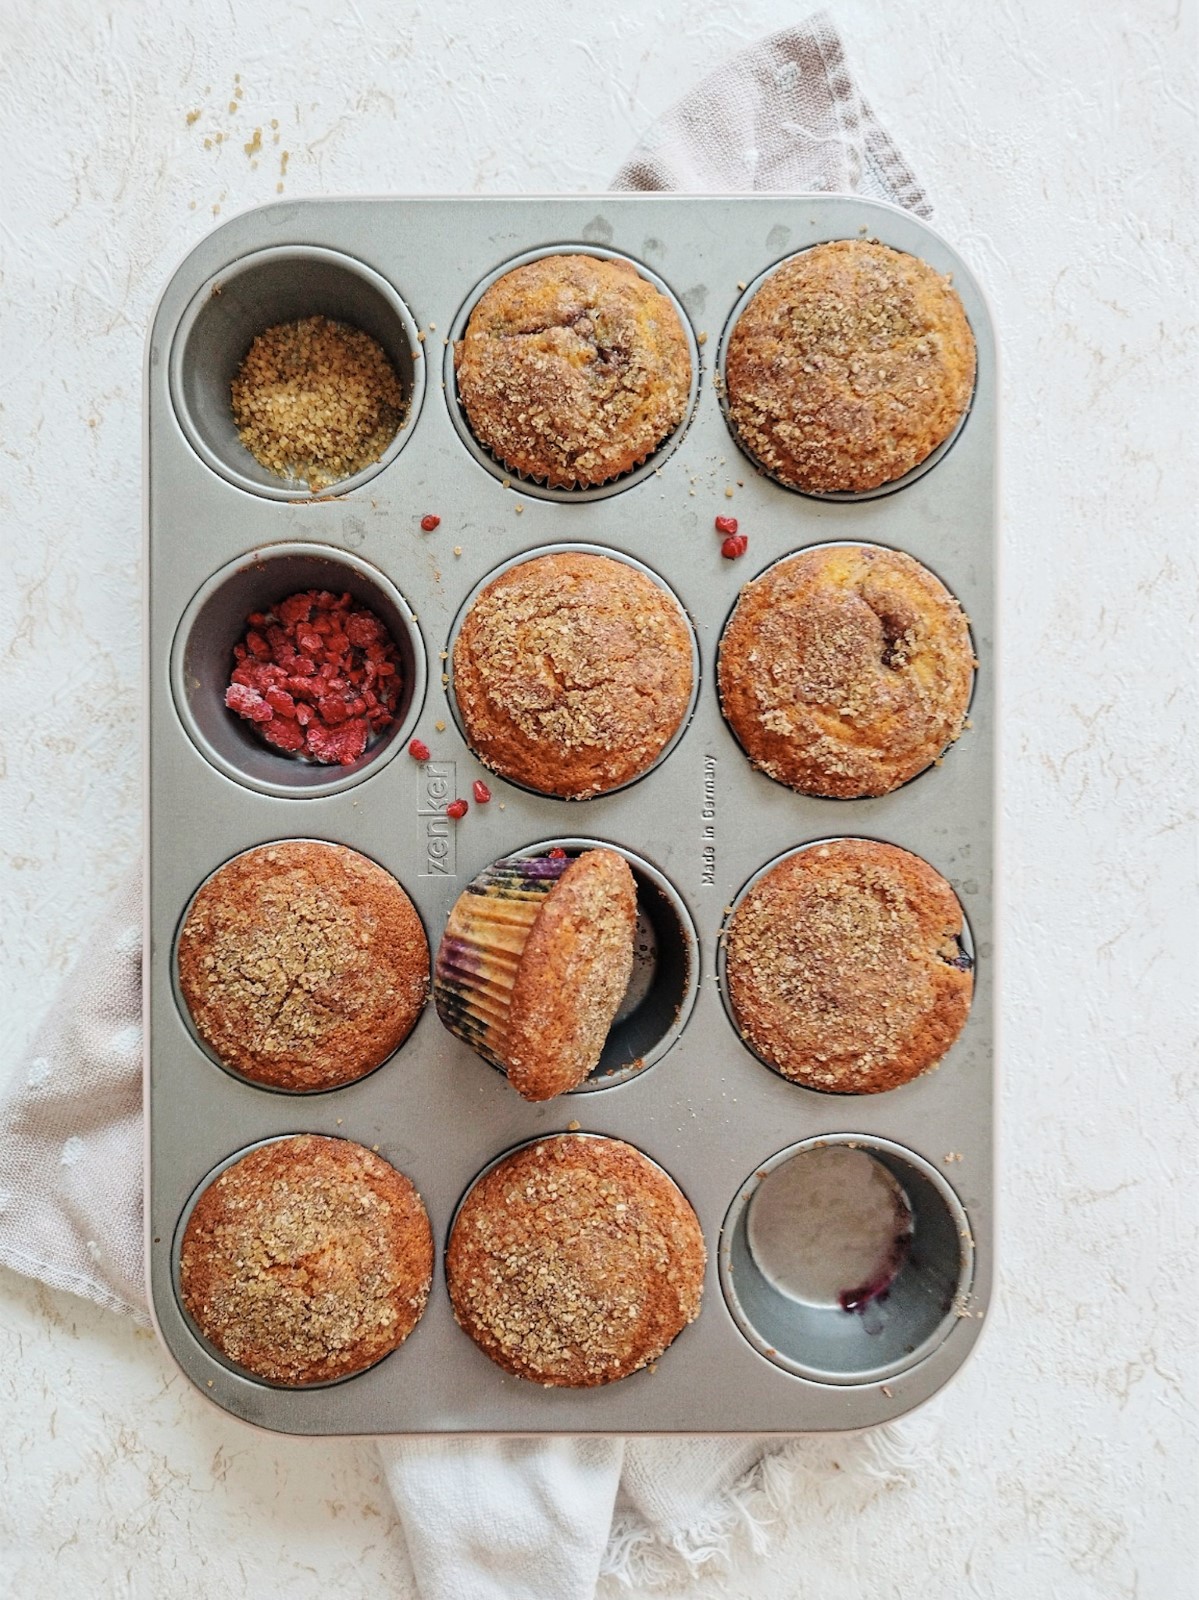 Muffins with Berries and Streusel Topping - Muffins with berries and streusel topping